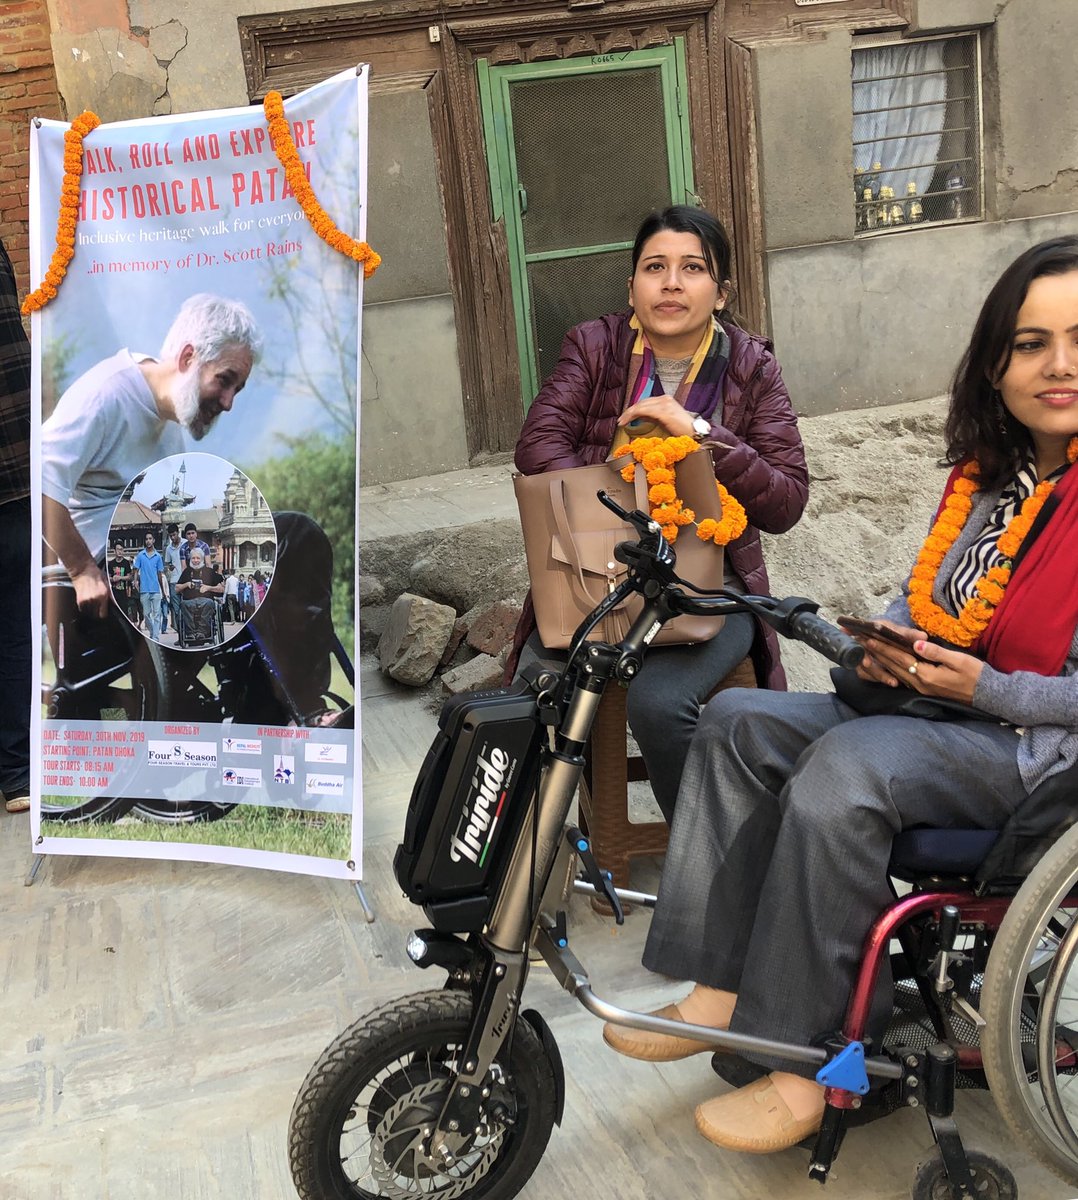 #Nepal celebrated birth anniversary of #ScottRains Patan excursion for friends with #disabilities. A temporary #ramp was put up in Mul chowk and the guided tour was organizd by @4SeasonTravel . 🙏🏼 to all participants n partners. #accessibletourism 
#adventureforall #nepaltourism